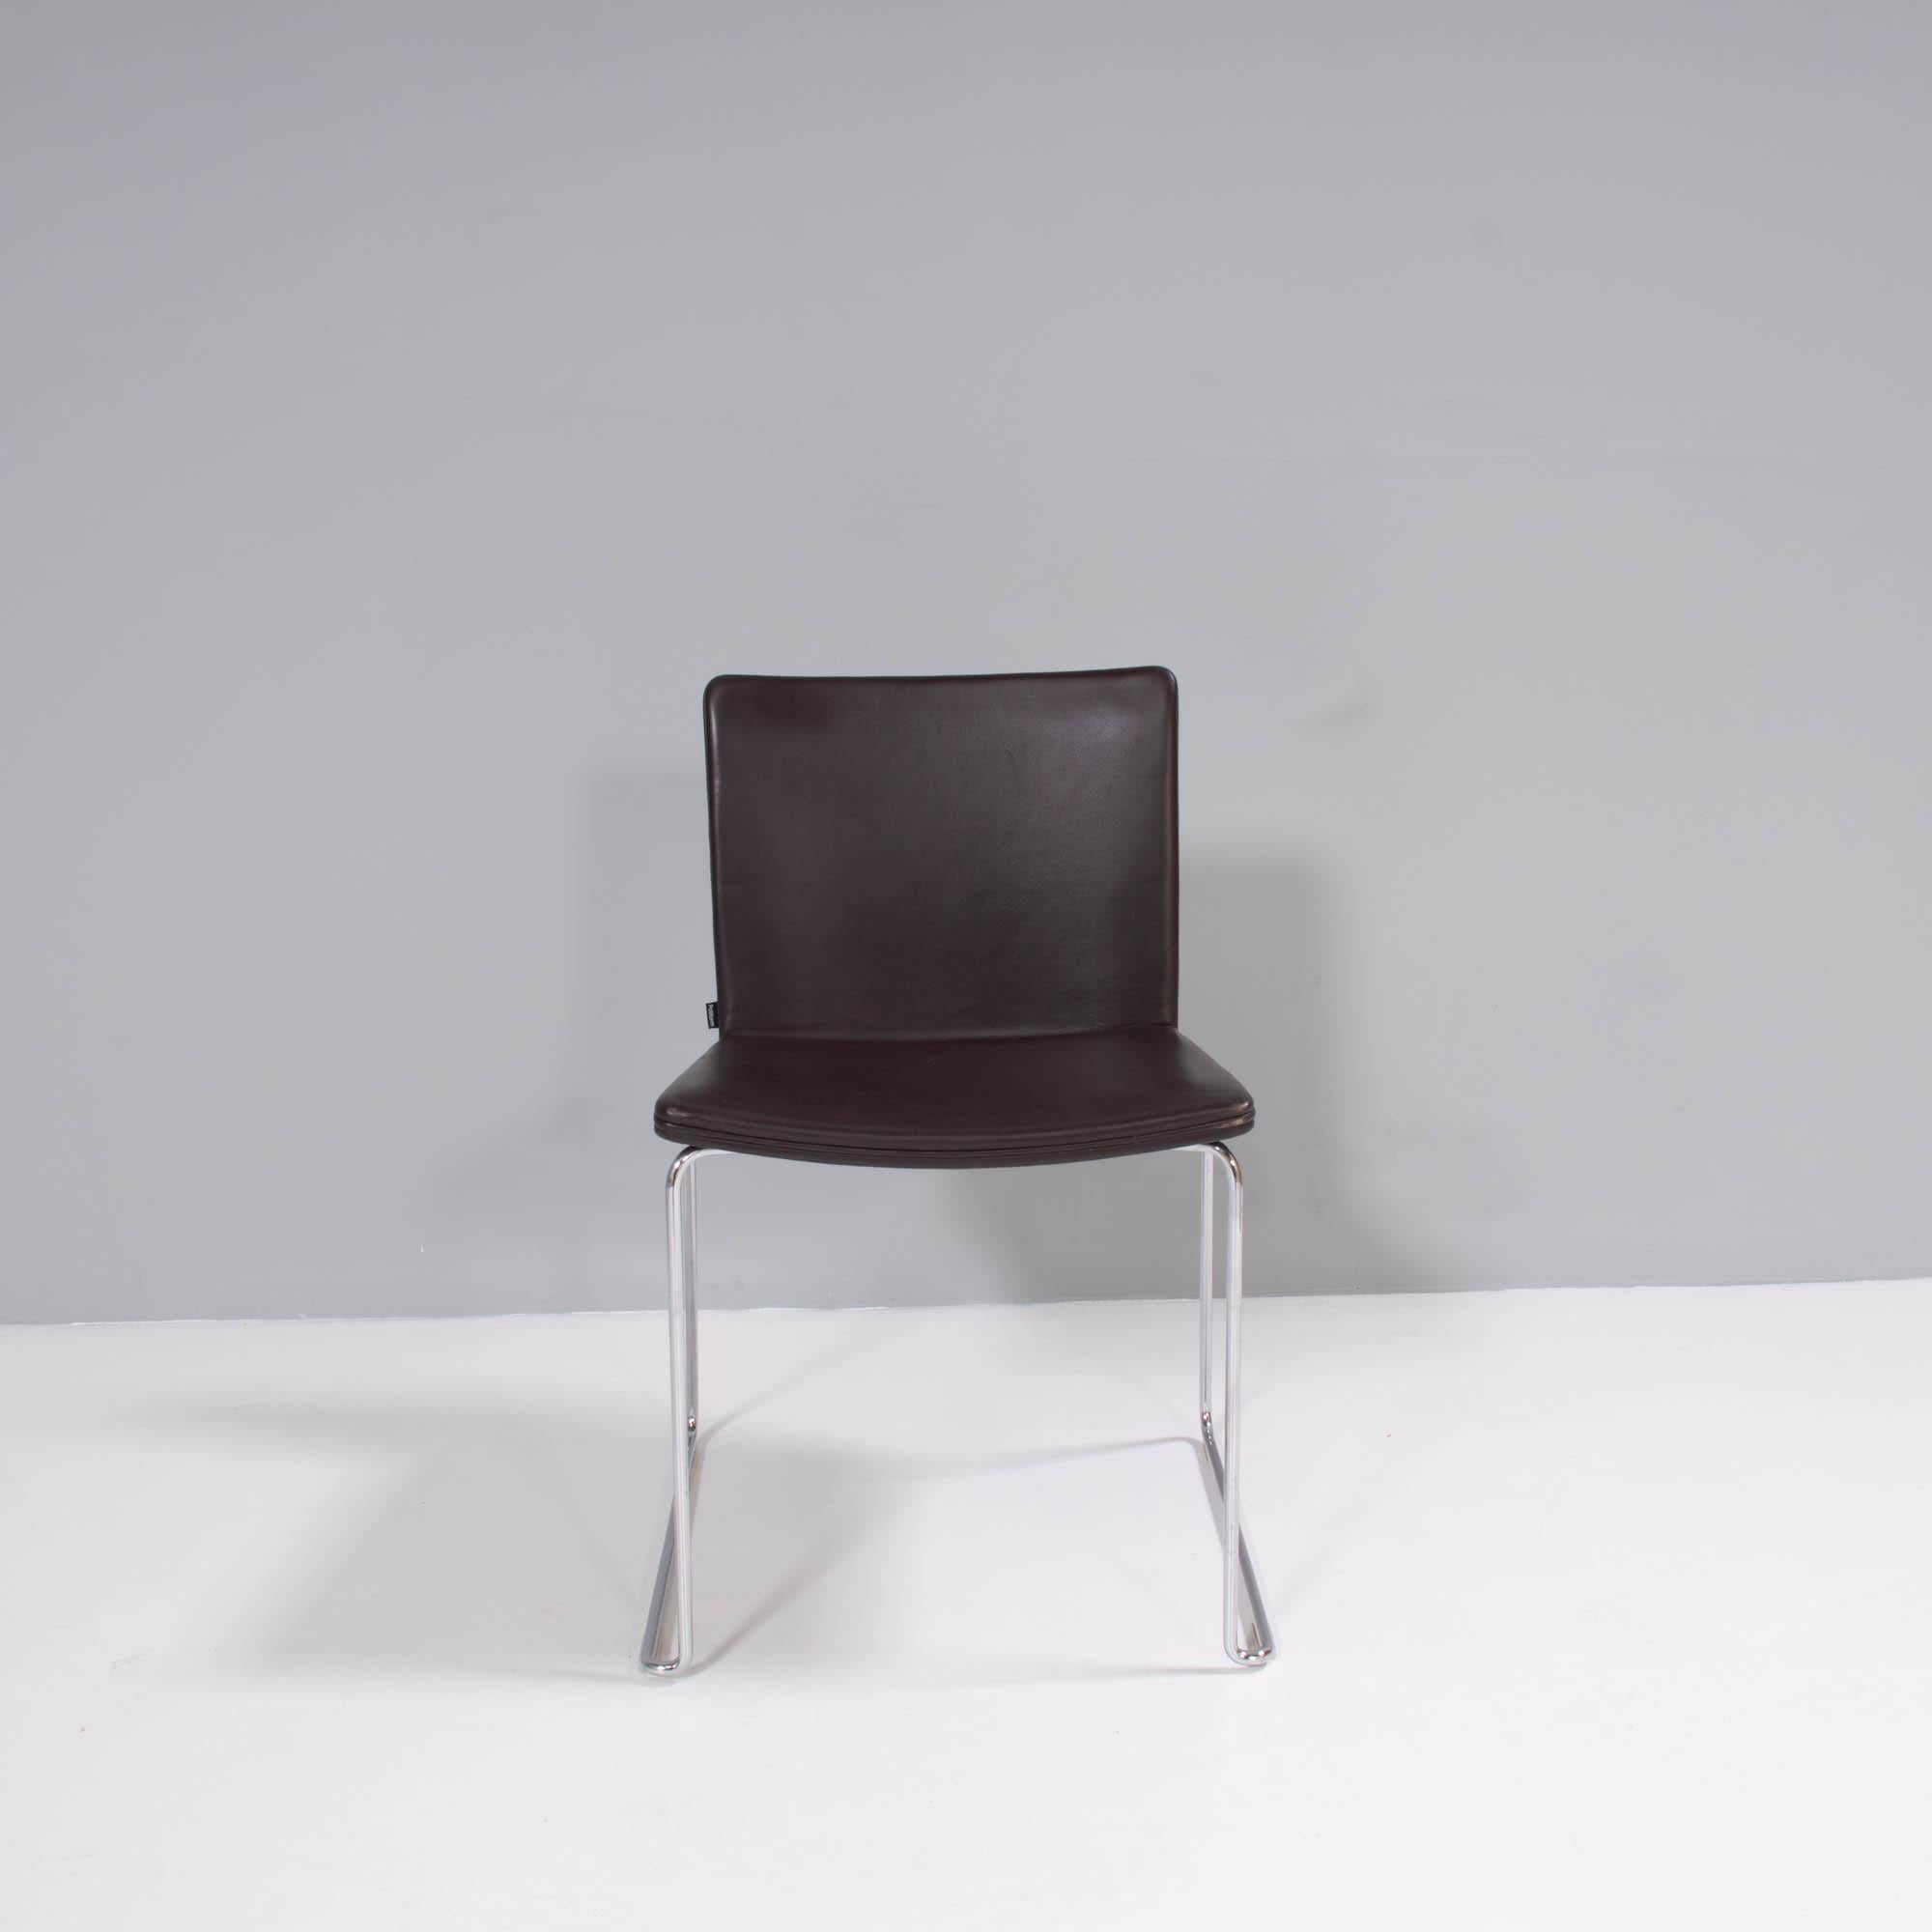 Originally designed by Mario Mazzer for Poliform in 2003, the Nex dining chair is the epitome of sleek and modern design.

Featuring a chromed metal frame with sled base, the seat is molded for comfort and upholstered brown leather.

This chair